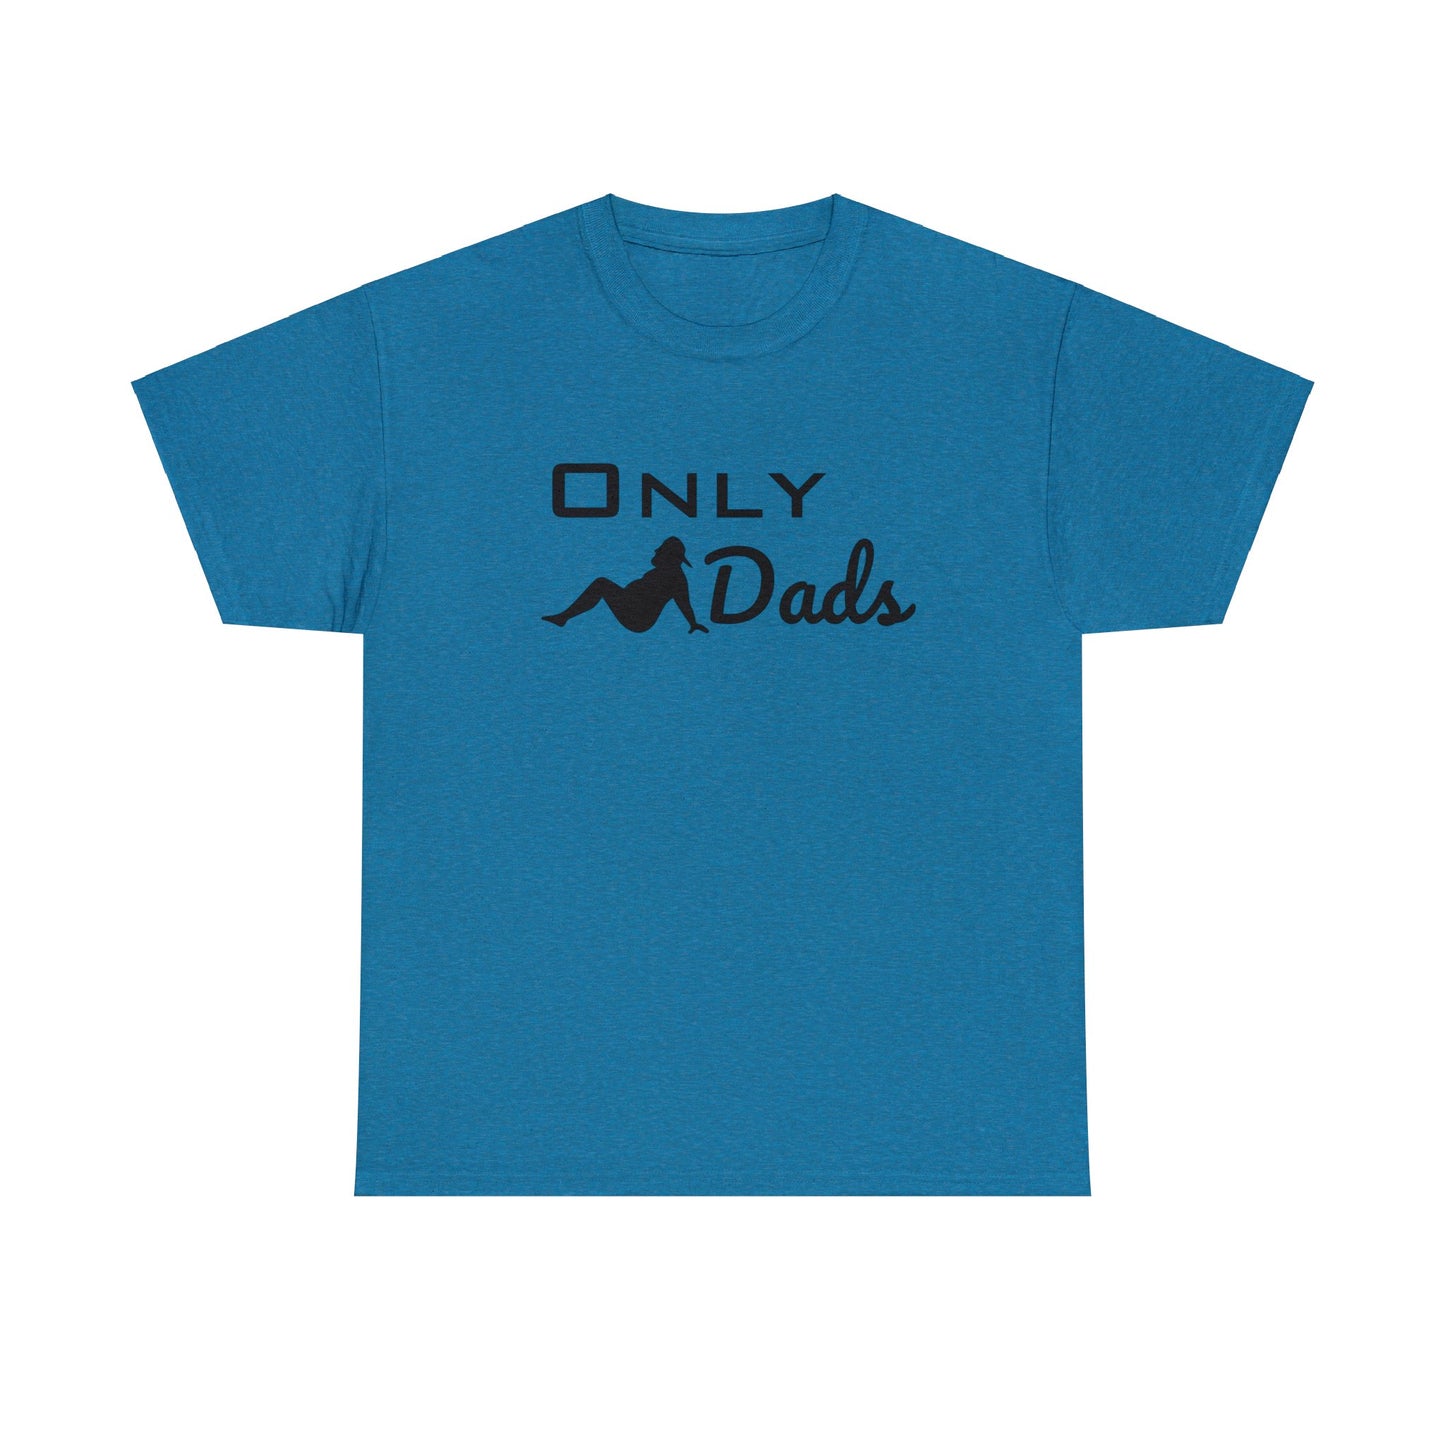 "Only Dads" printed unisex heavy cotton t-shirt for stylish fathers.